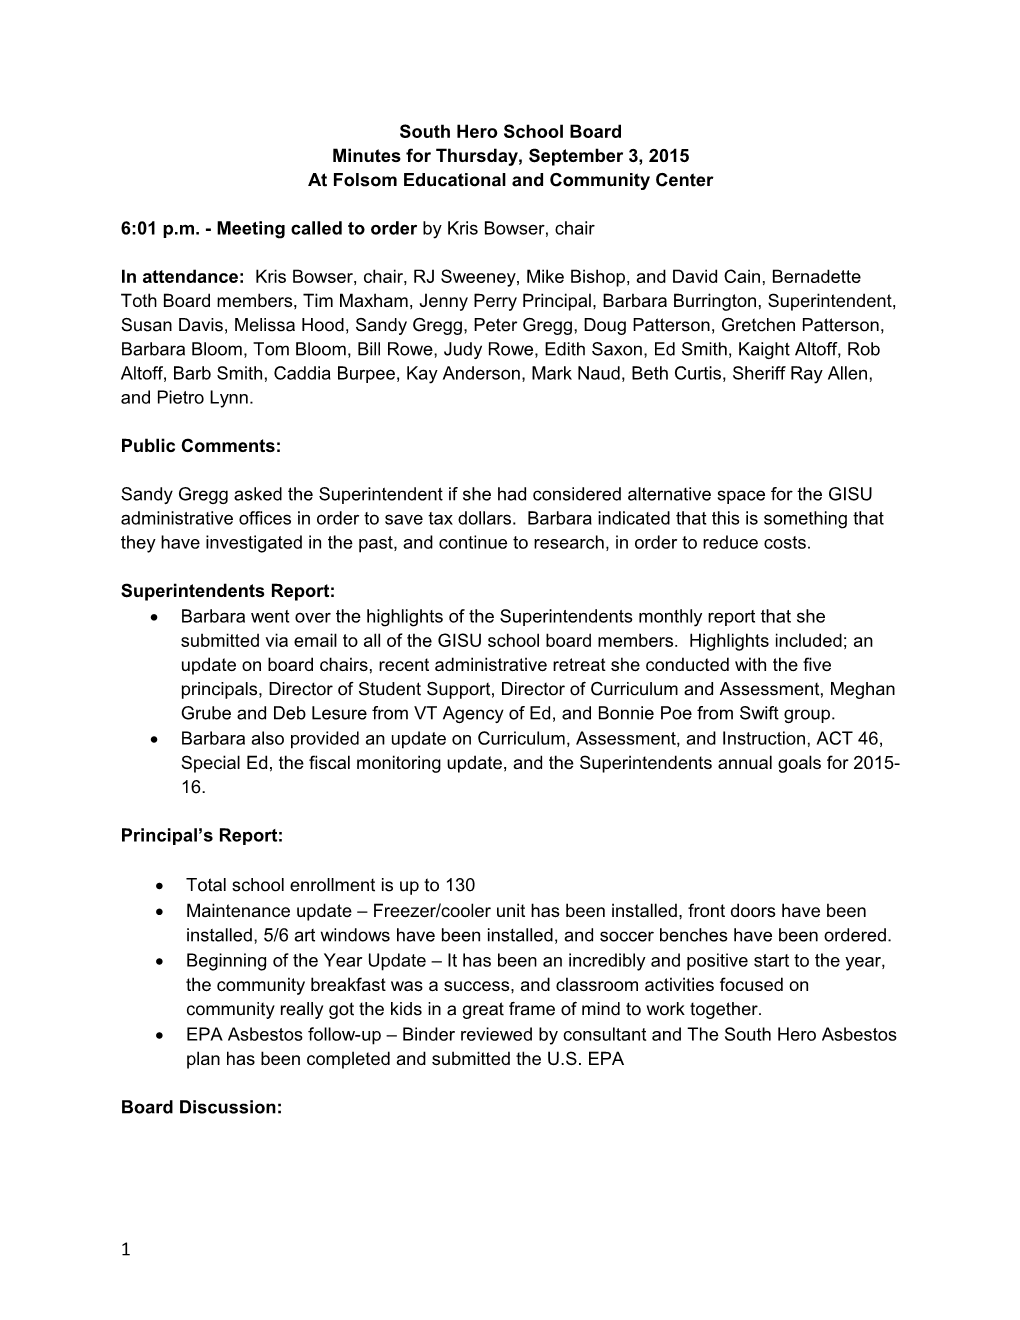 10-2-14 Draft of Board Meeting Minutes